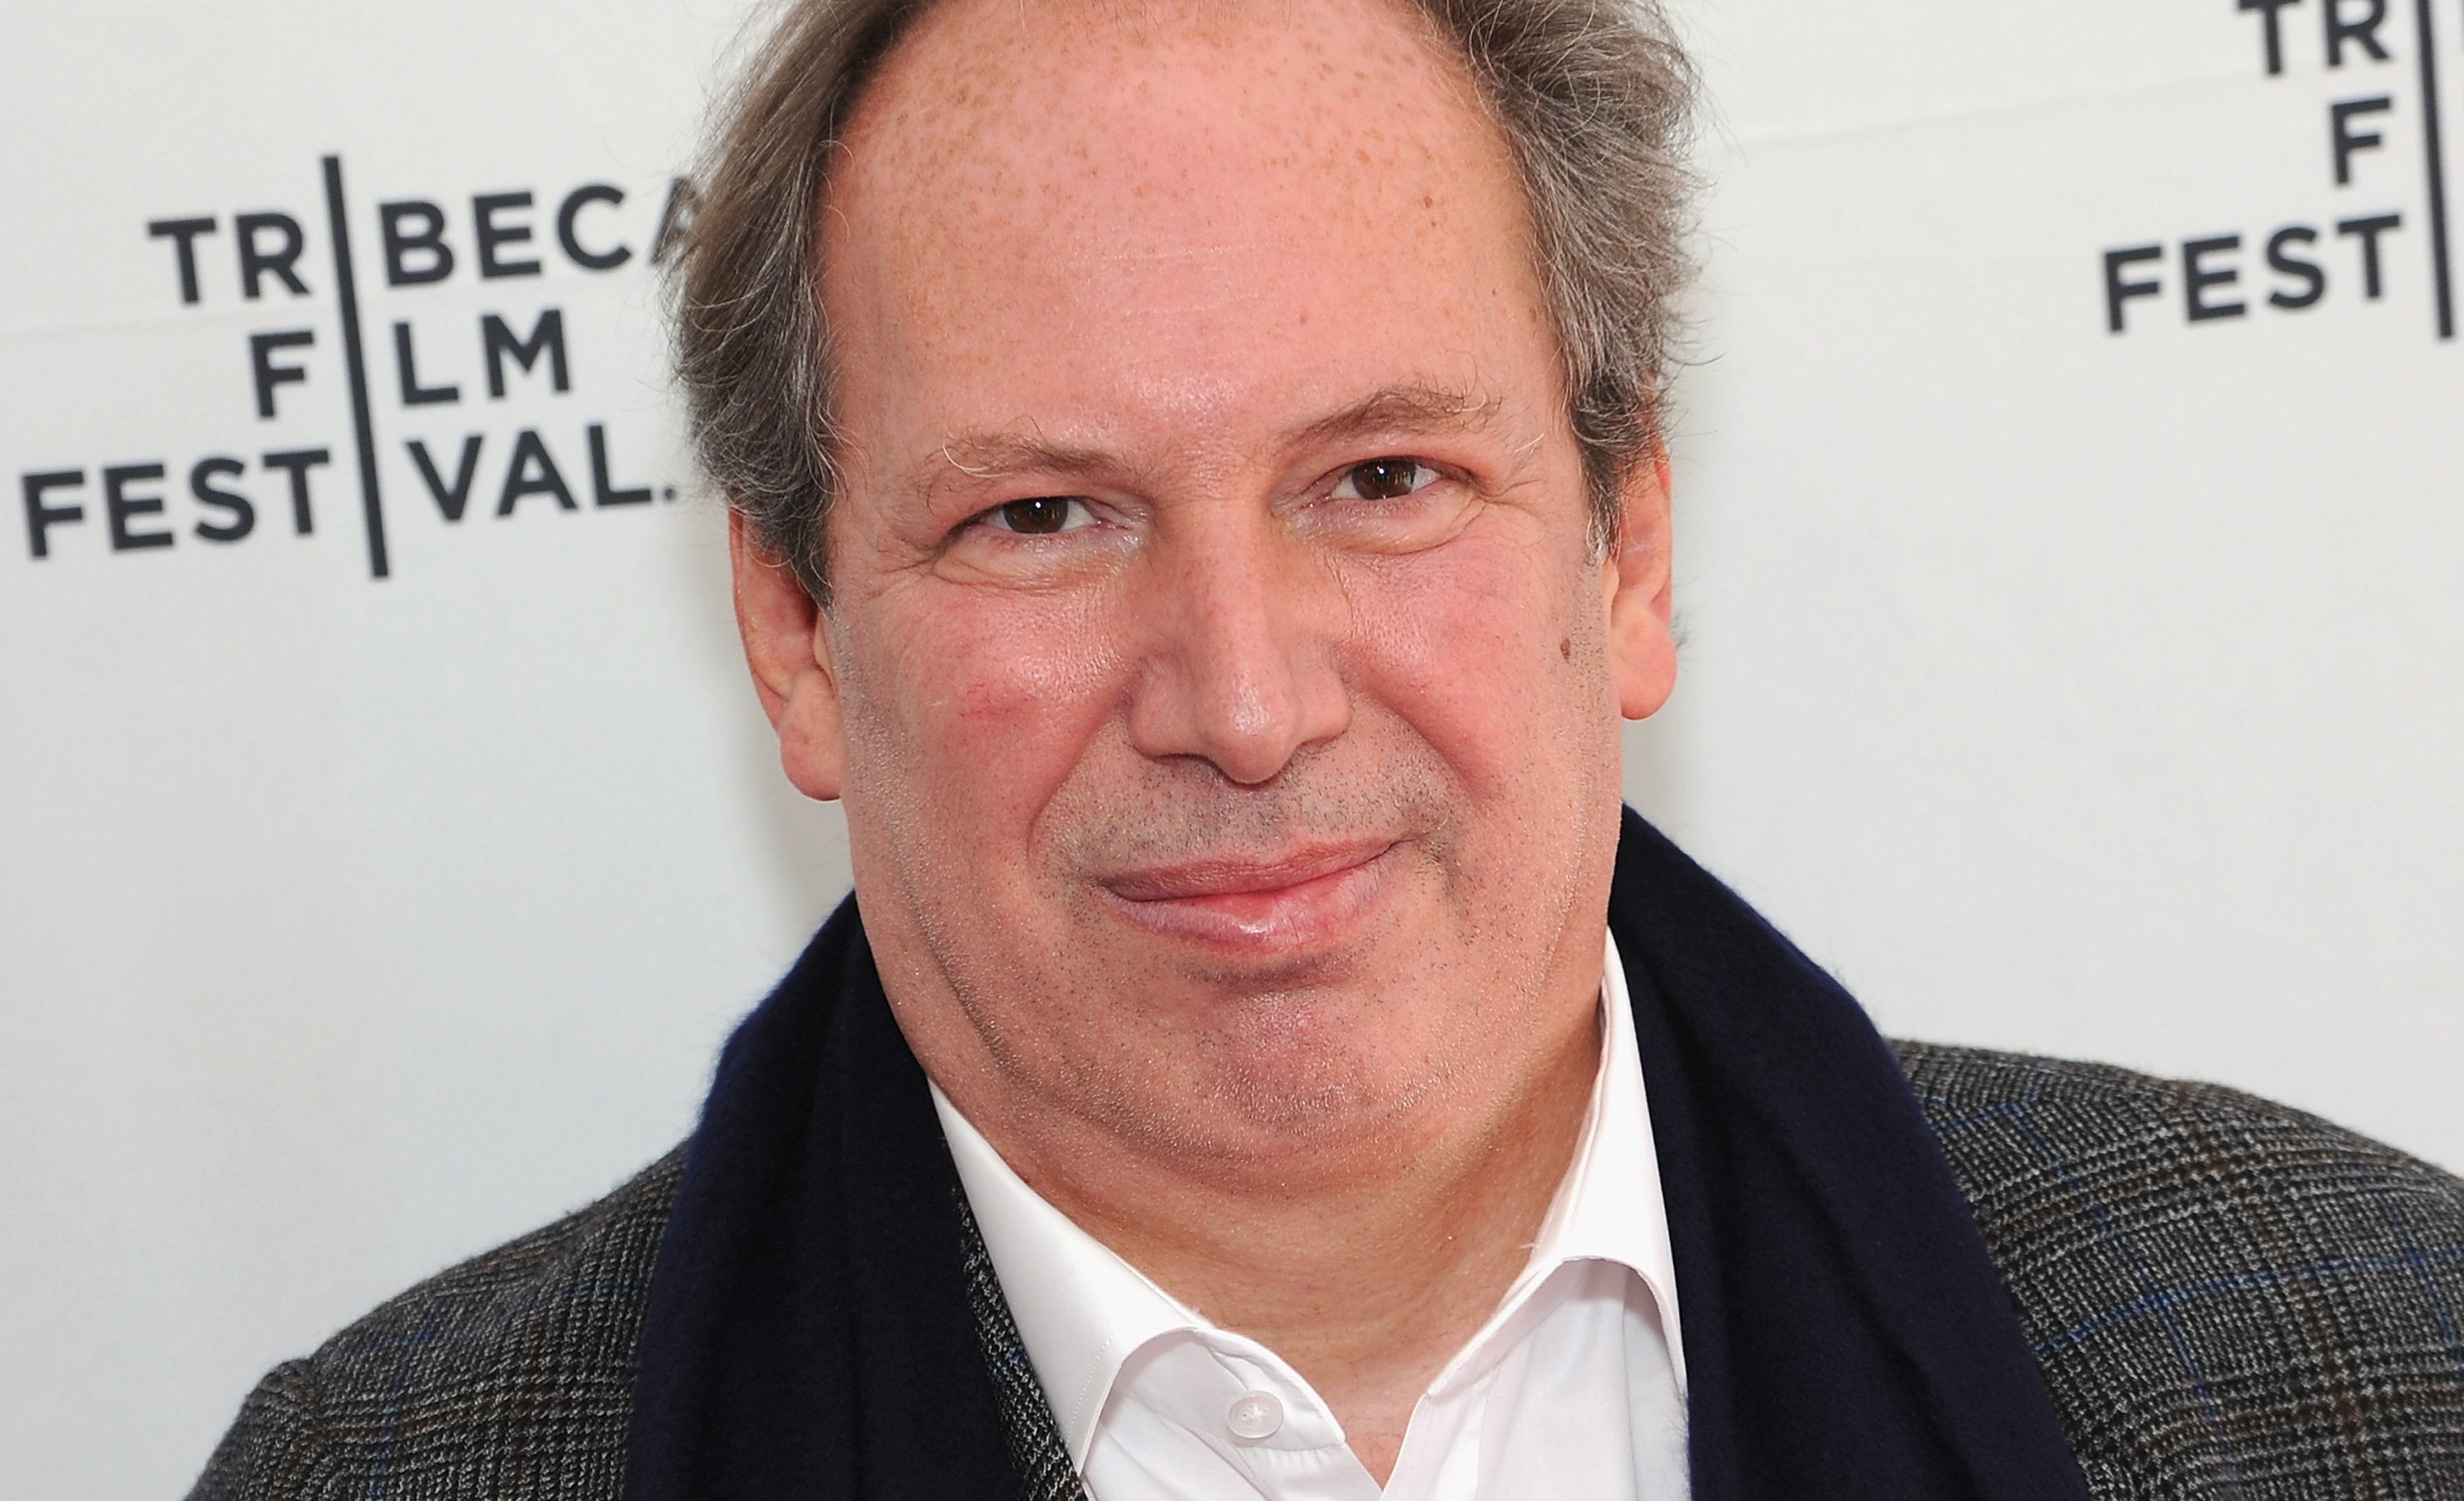 NEW YORK, NY - APRIL 26: Composer Hans Zimmer attends the 2015 Tribeca Film